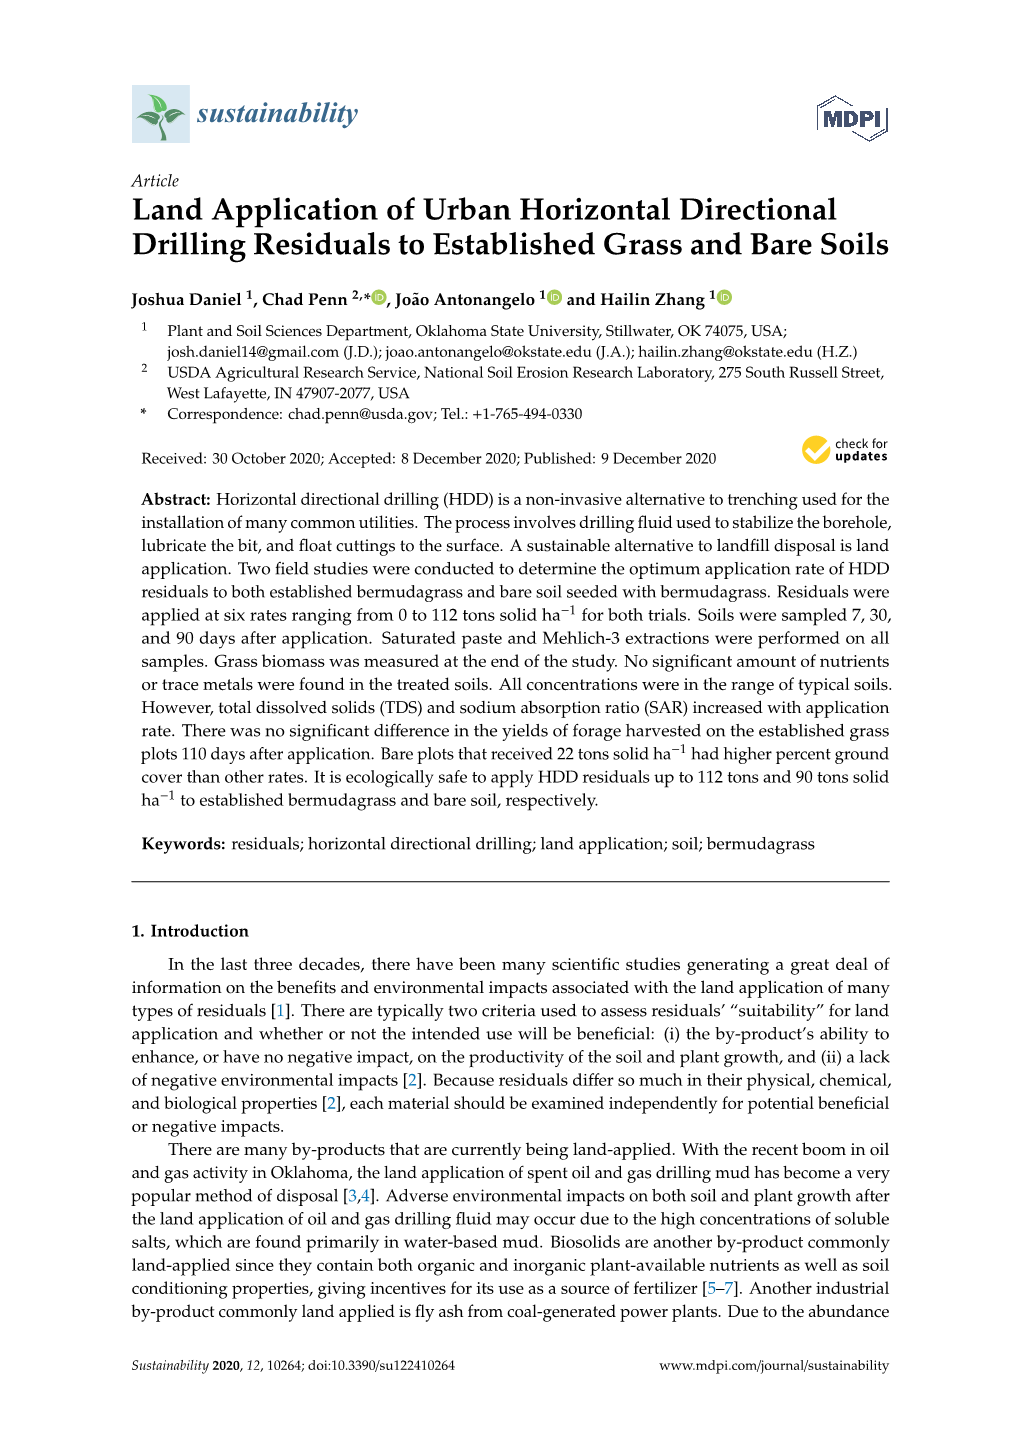 Land Application of Urban Horizontal Directional Drilling Residuals to Established Grass and Bare Soils